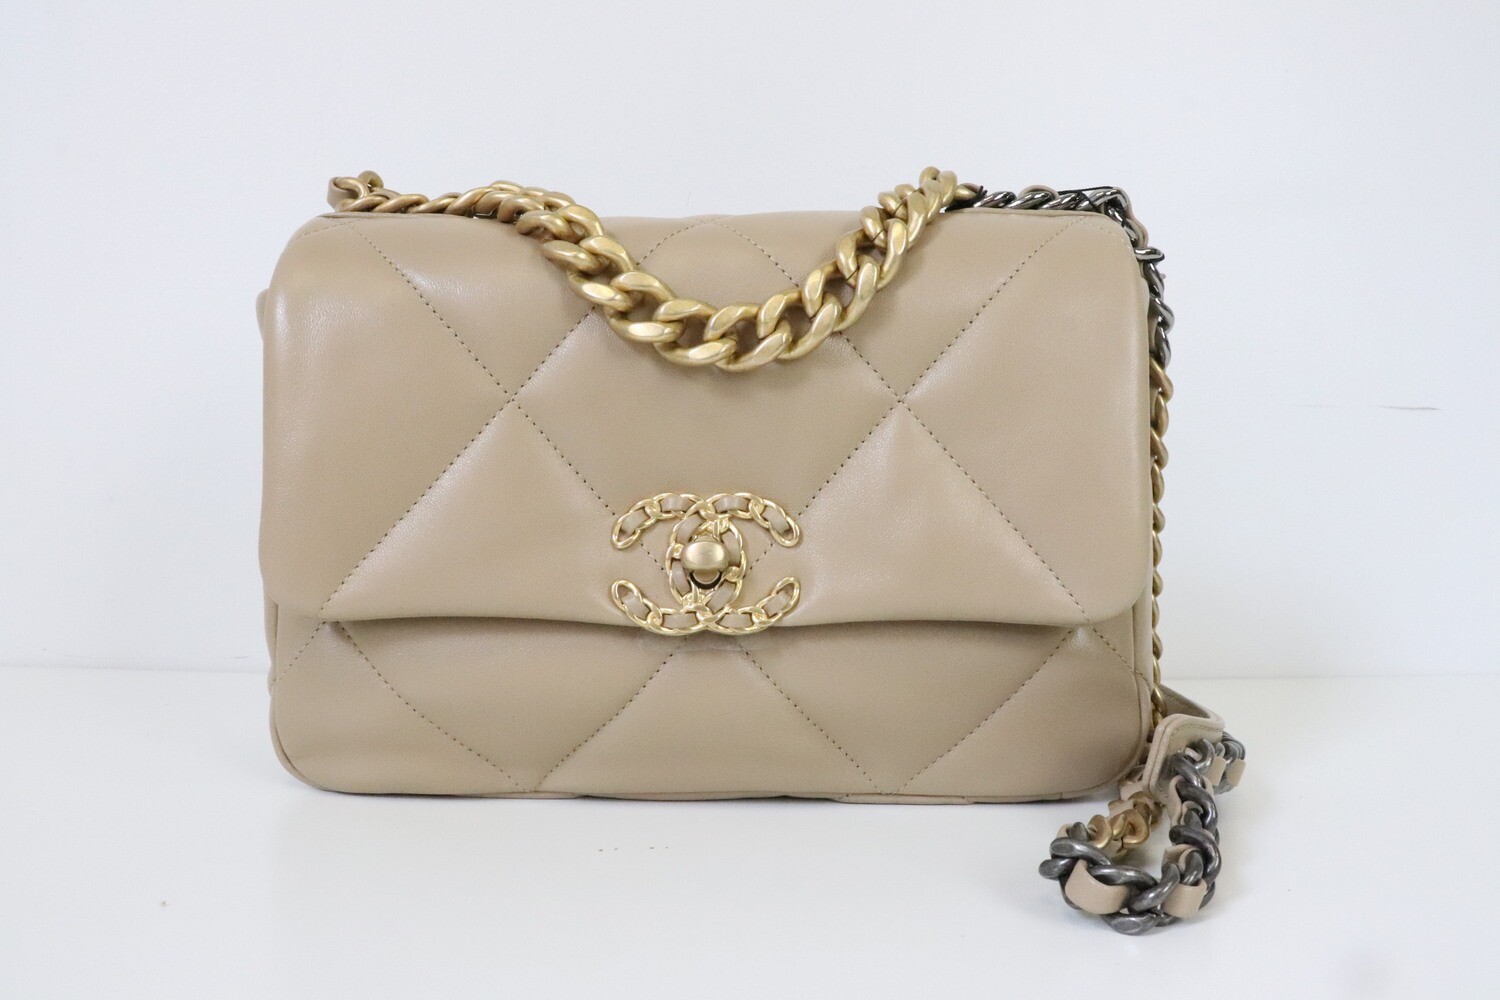 CHANEL 19 21C pastel yellow handbag l unboxing (waiting for 21A